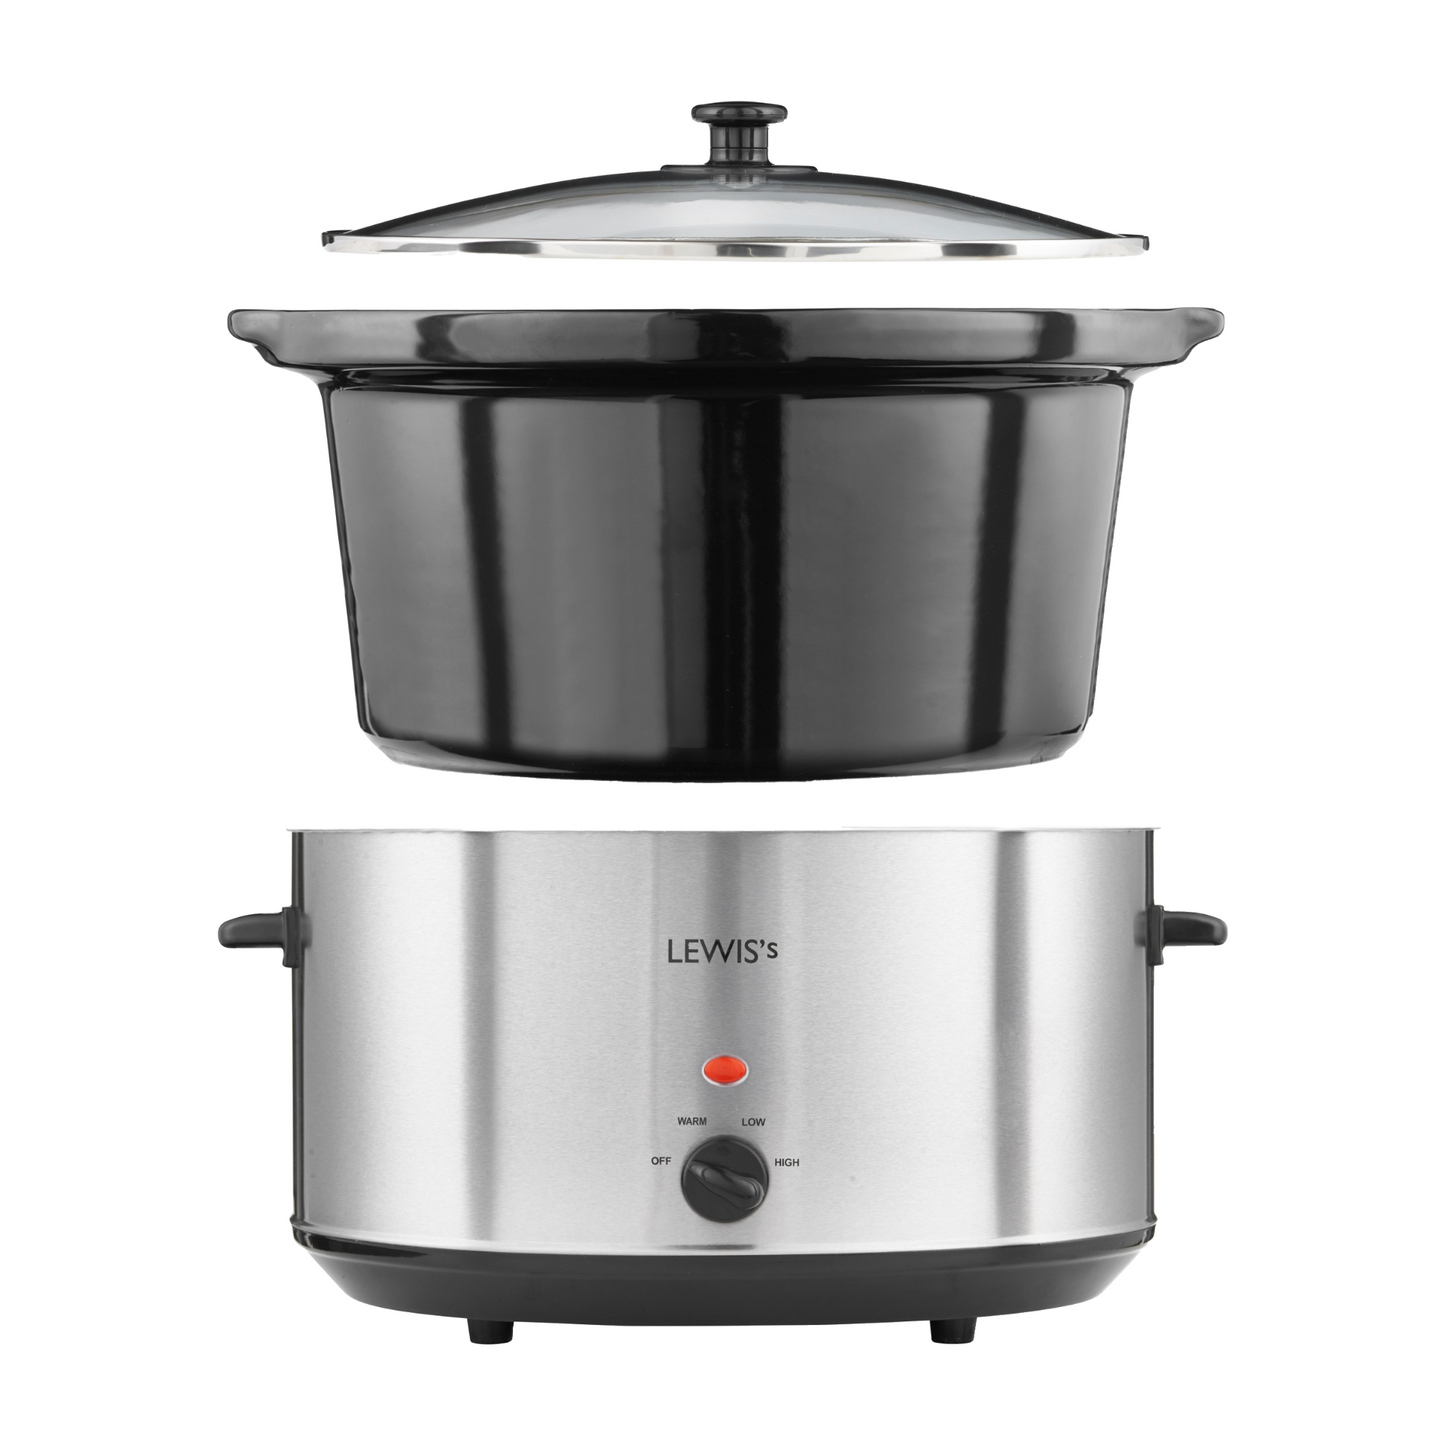 Lewis's 8L Stainless Steel Slow Cooker